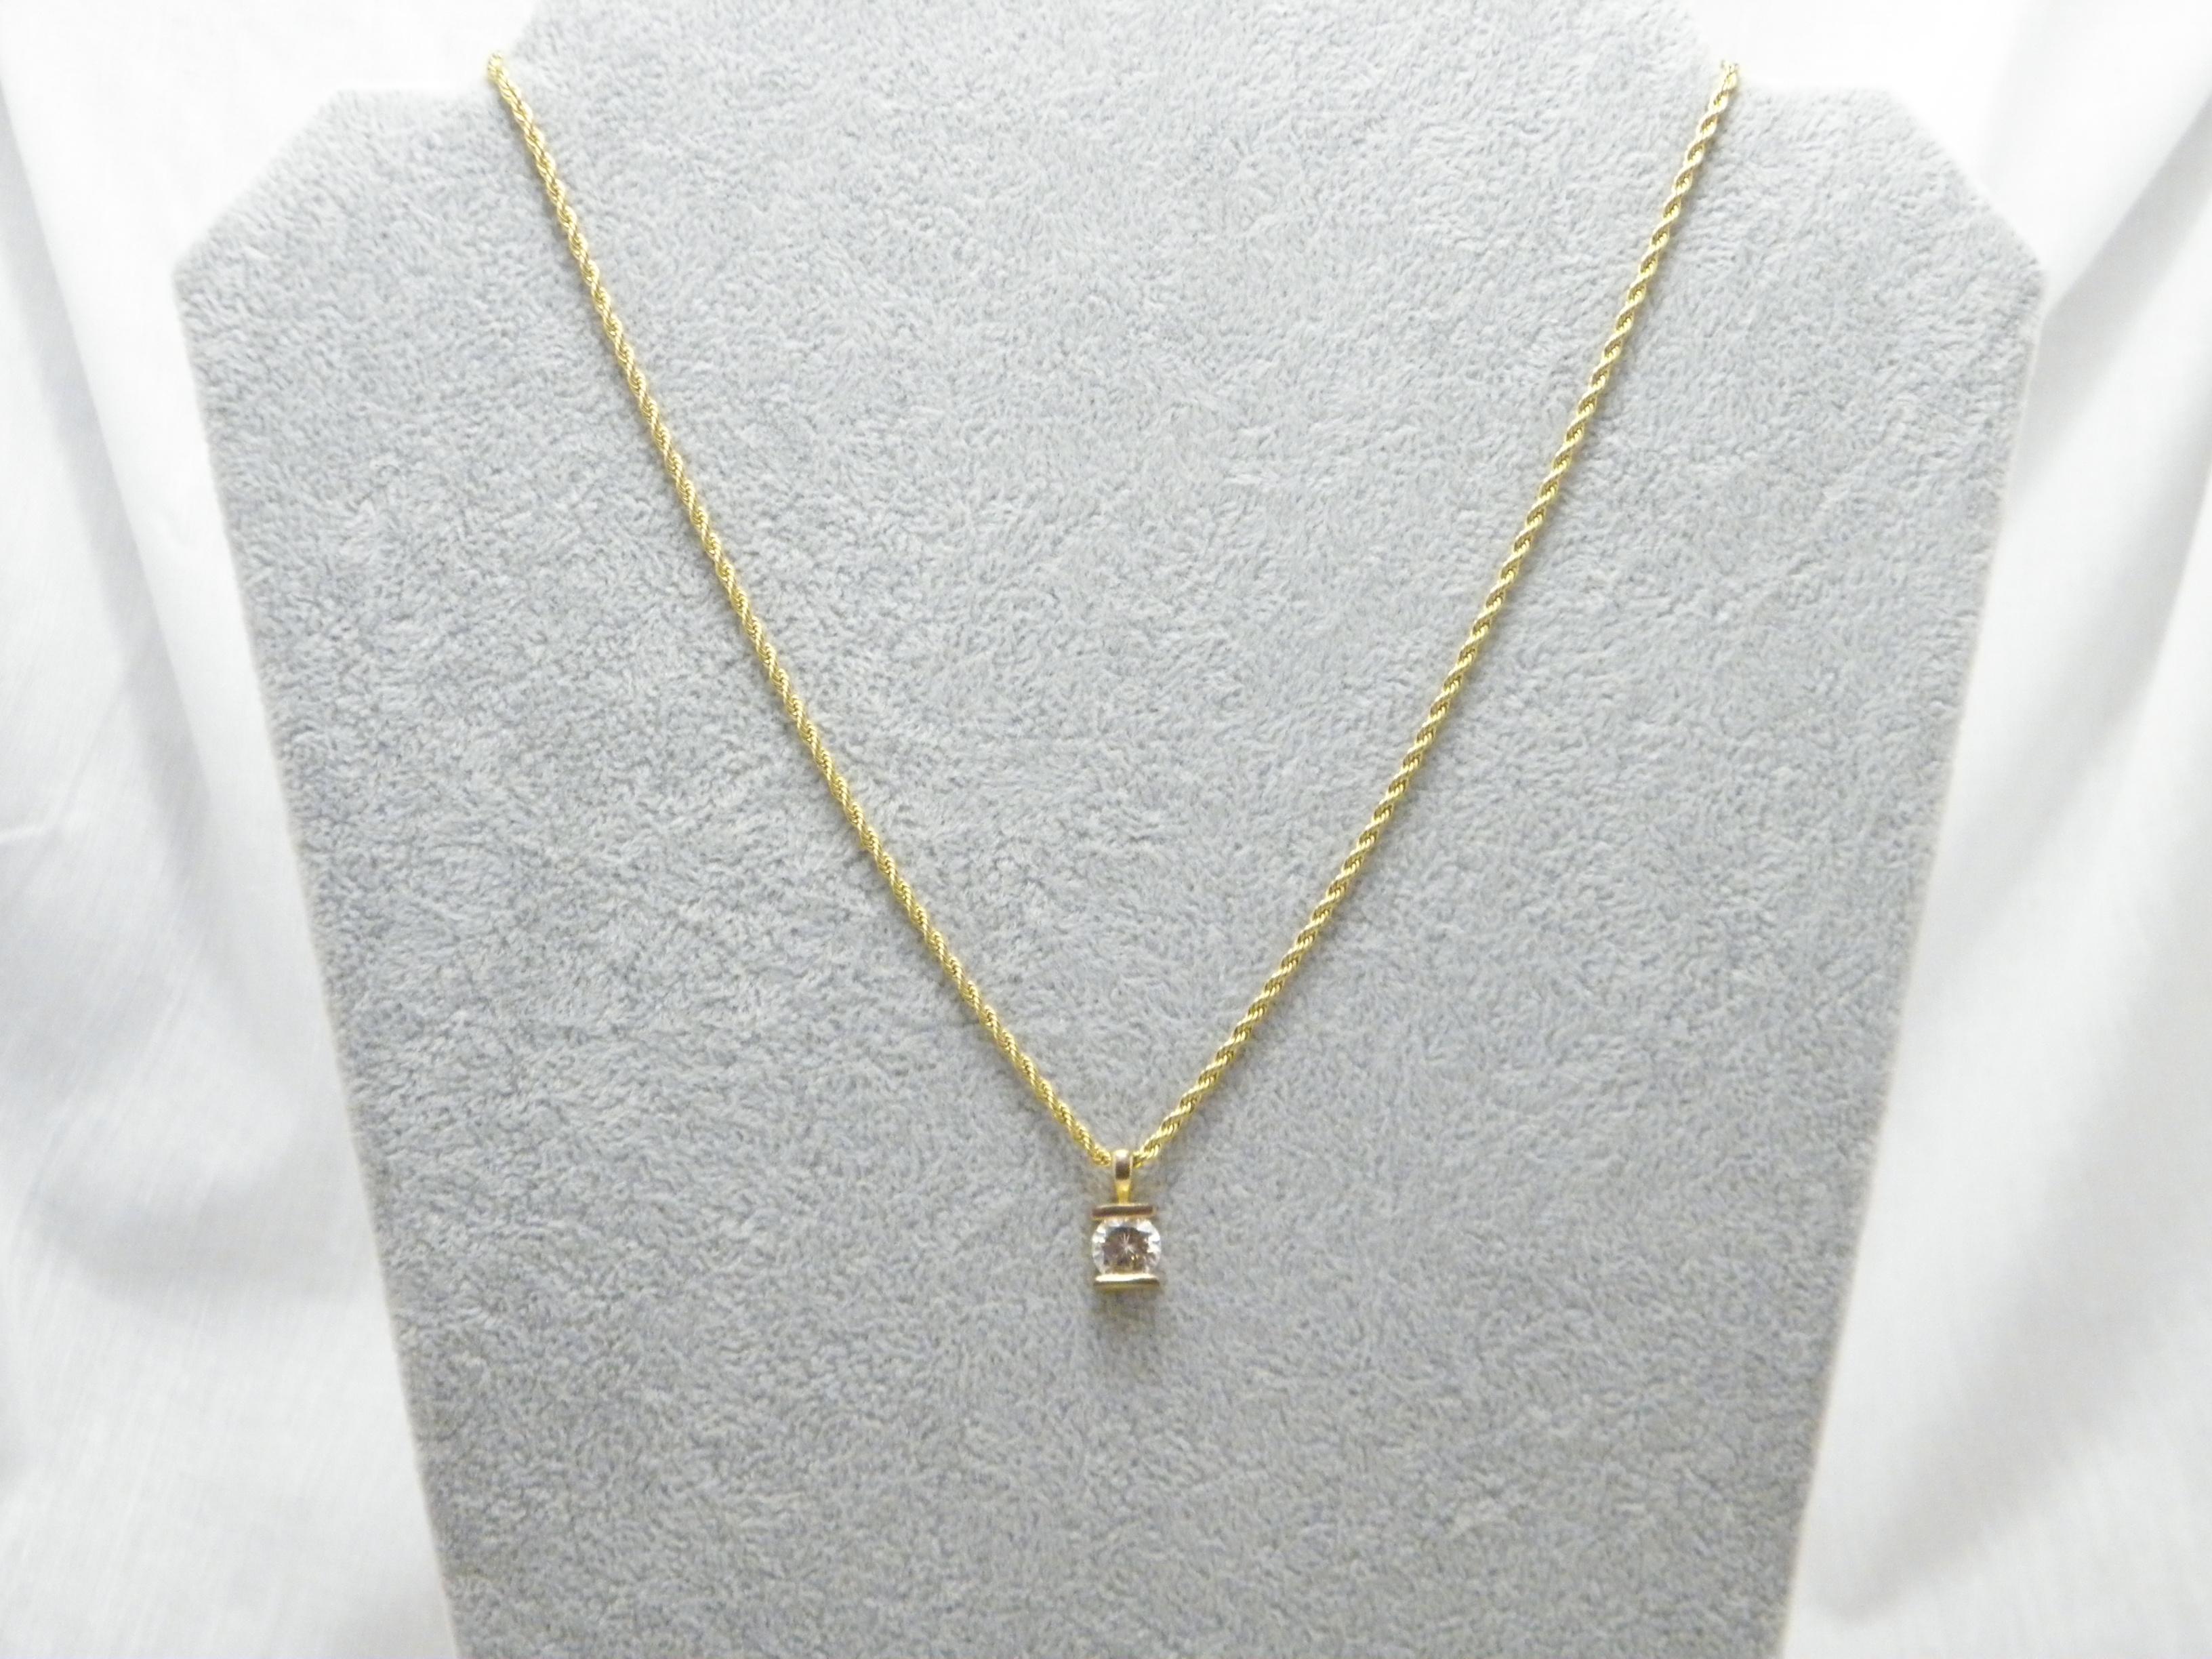 Vintage 14ct Gold Heavy Diamond Paste Pendant Necklace Rope Chain 585 18 Inch In Good Condition For Sale In Camelford, GB